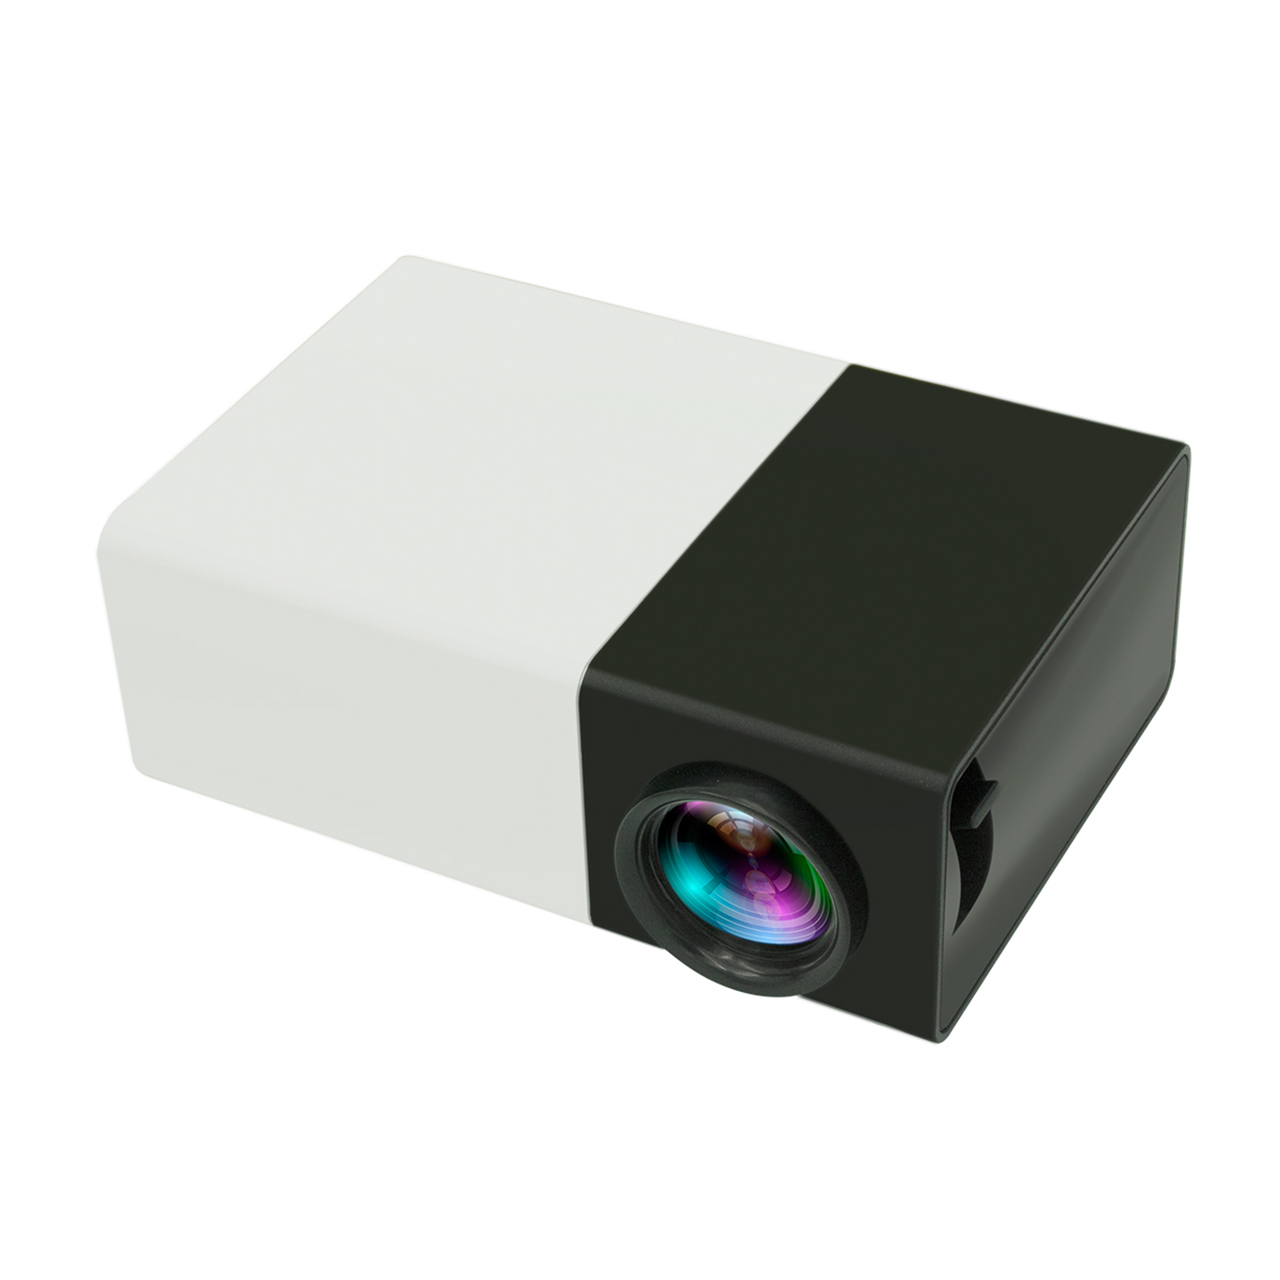 

YG-300 LCD Mini Portable LED Projector Support 1080P 400 - 600 Lumens 320 x 240 Pixels Home Cinema